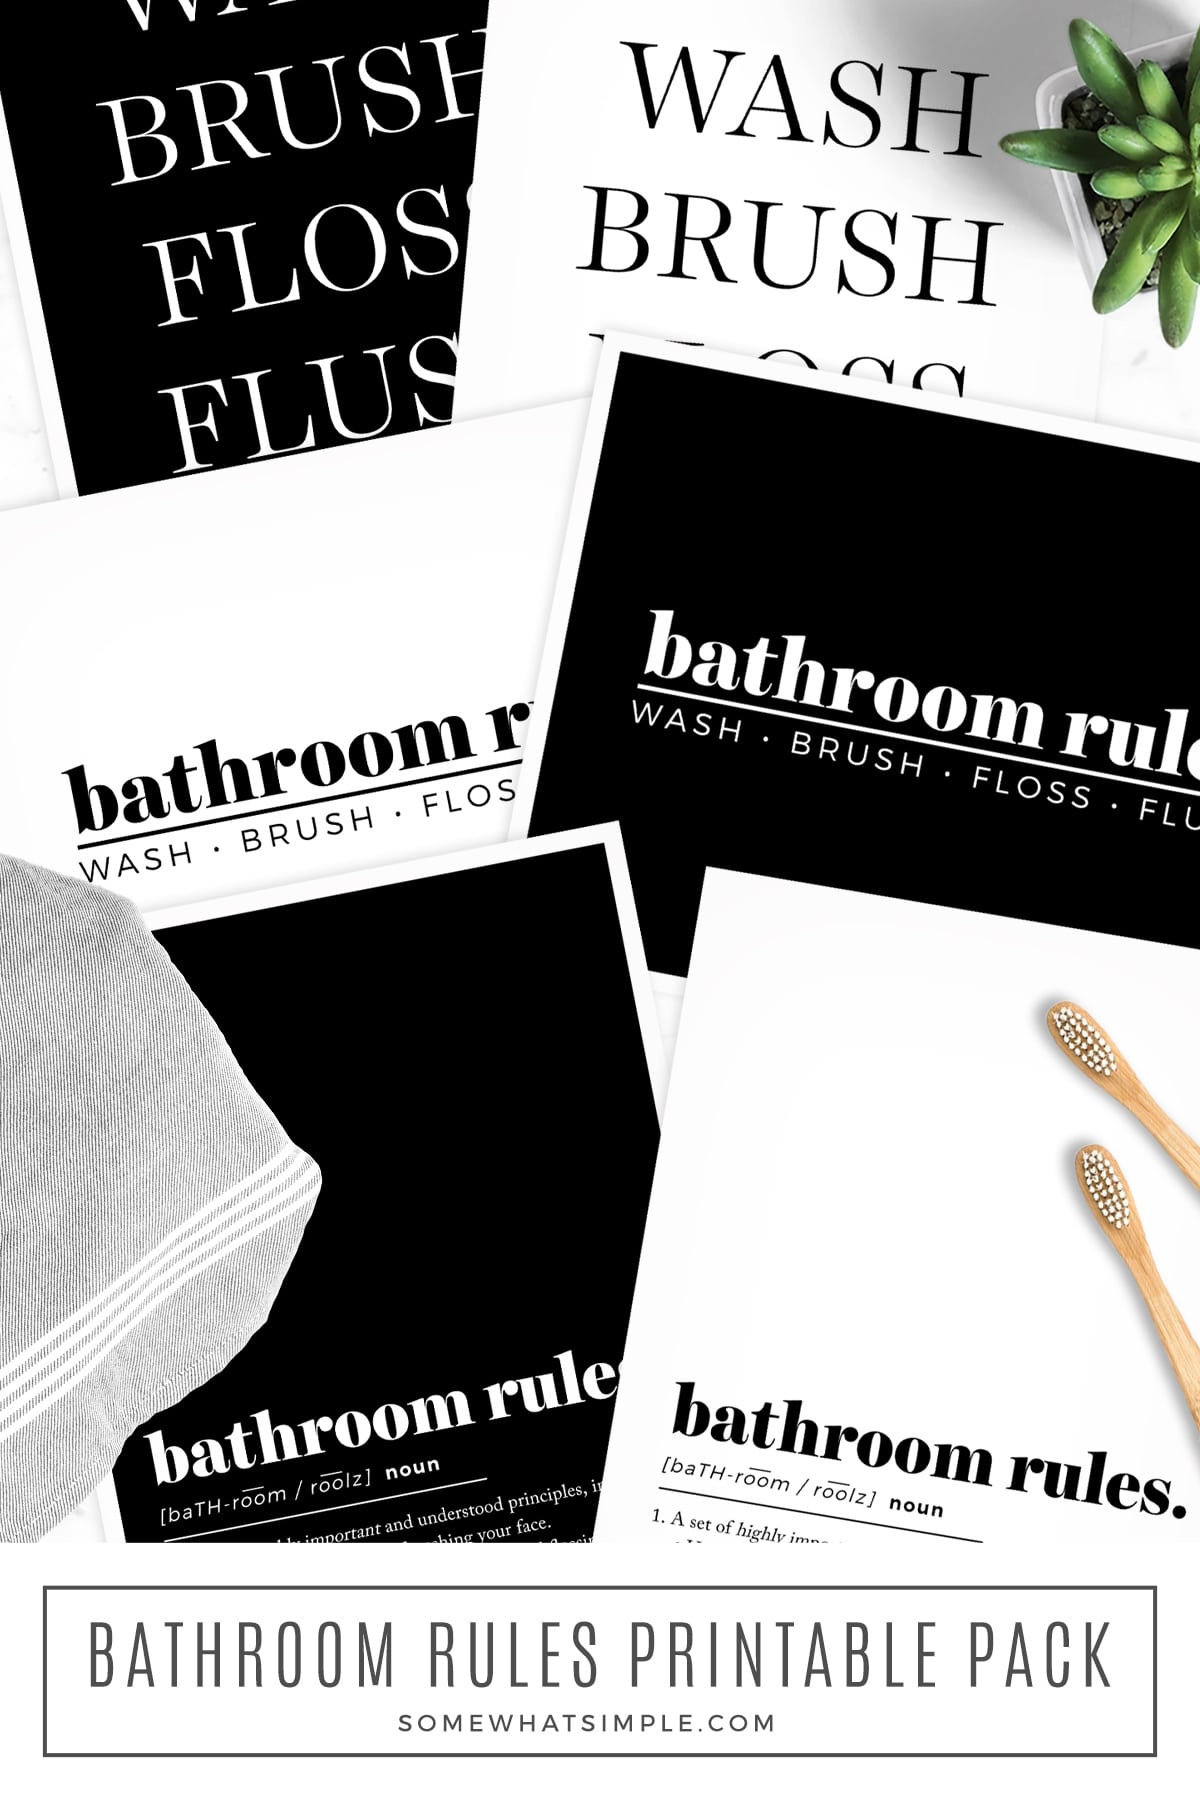 Download, print, and hang this bathroom rules sign for some simple, fresh, minimalist decor! via @somewhatsimple